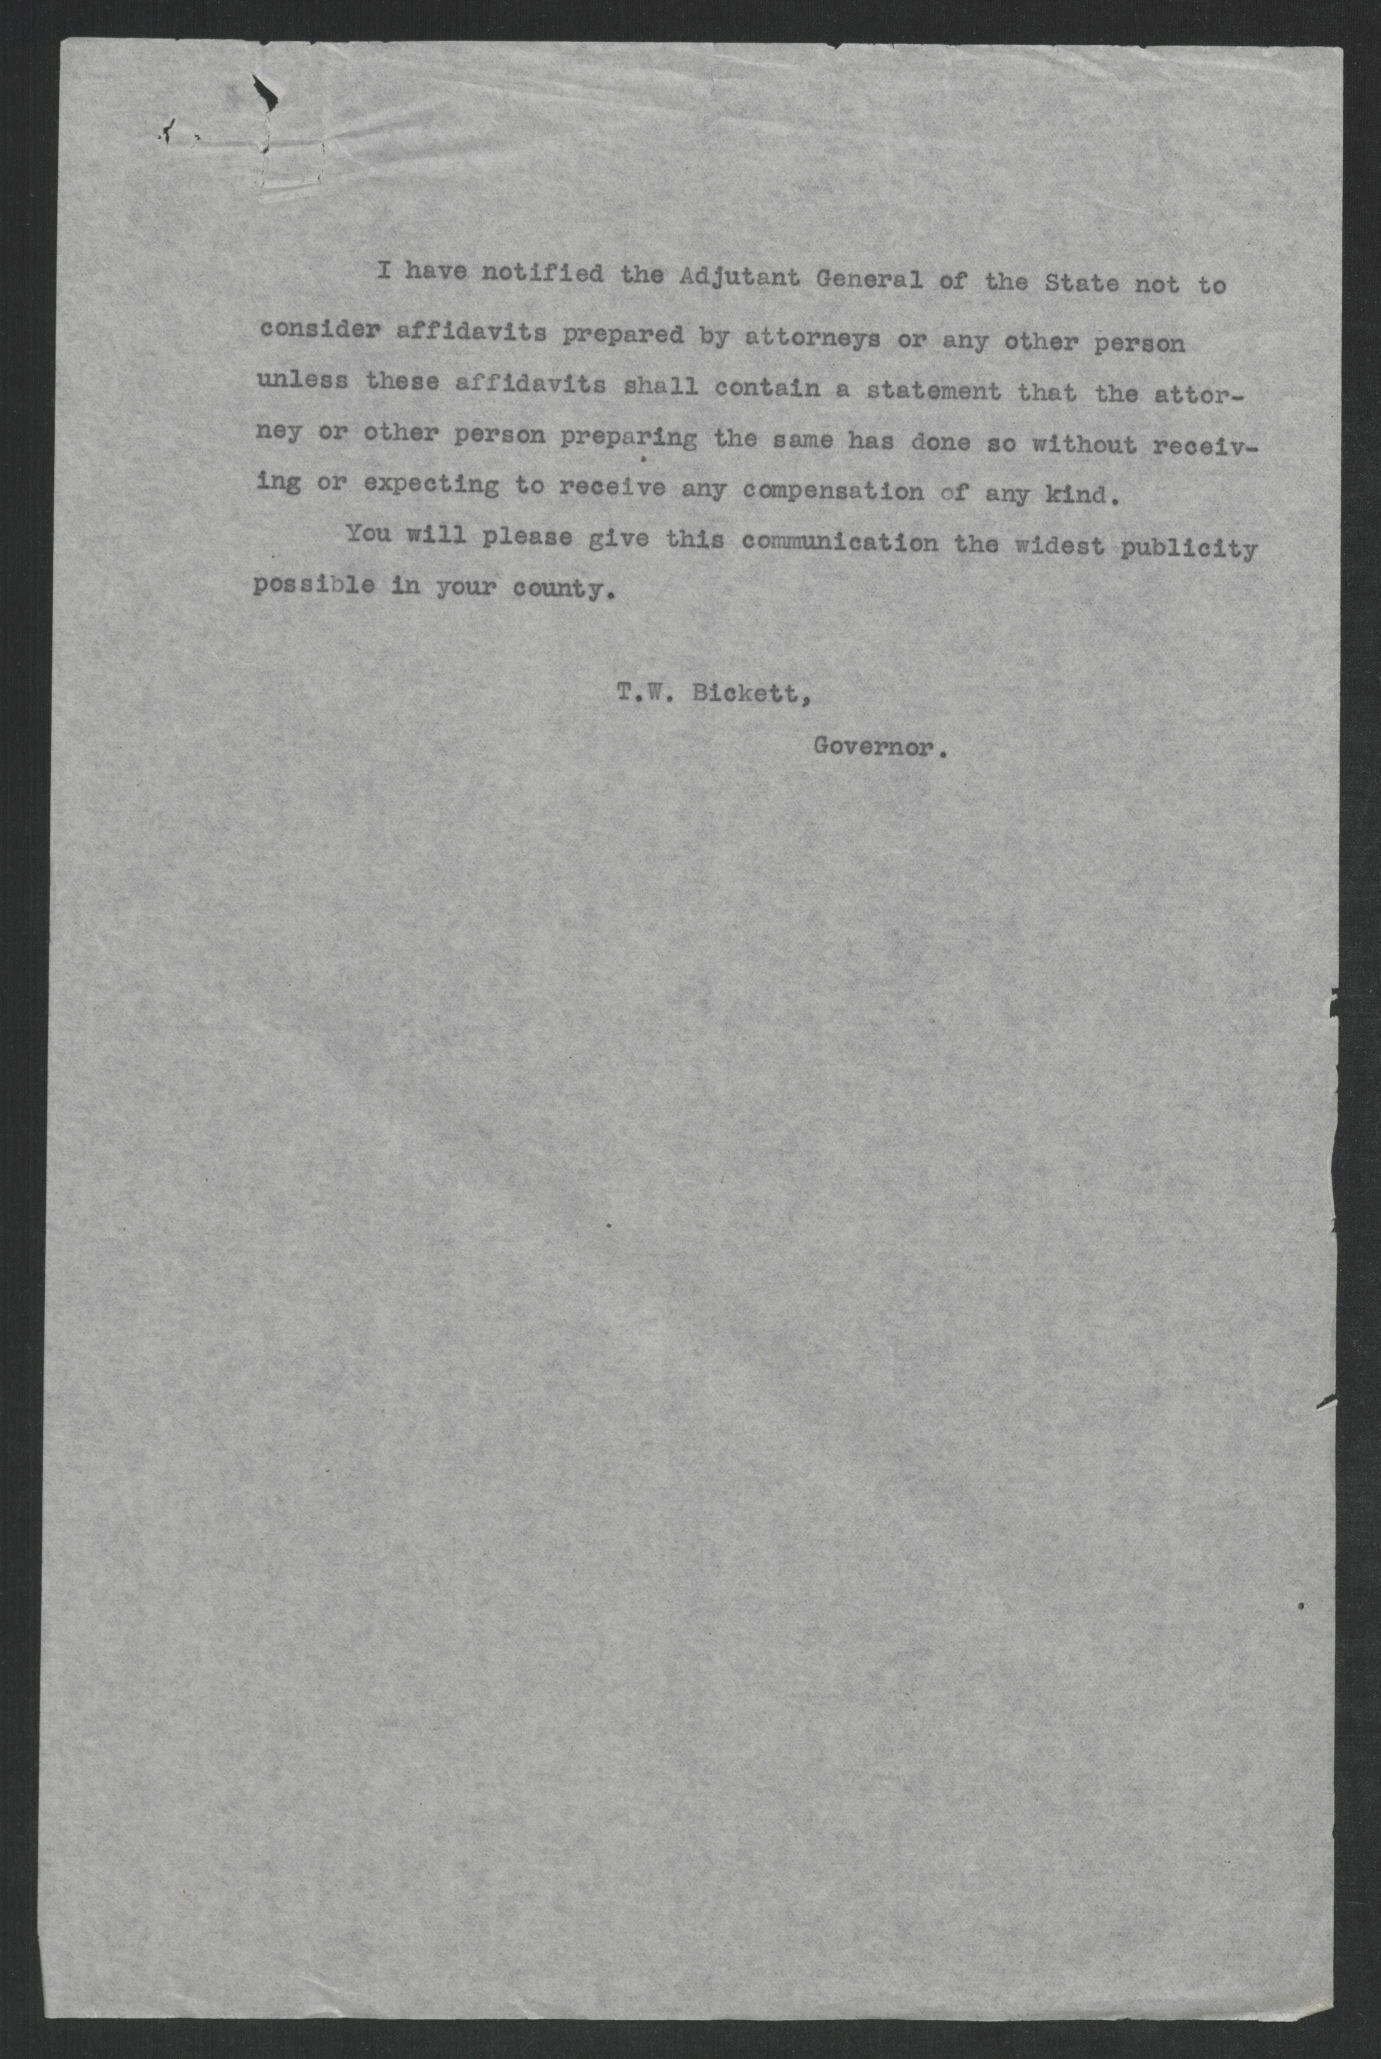 Letter from Thomas W. Bickett to All Local Exemption Boards, October 31, 1917, page 2